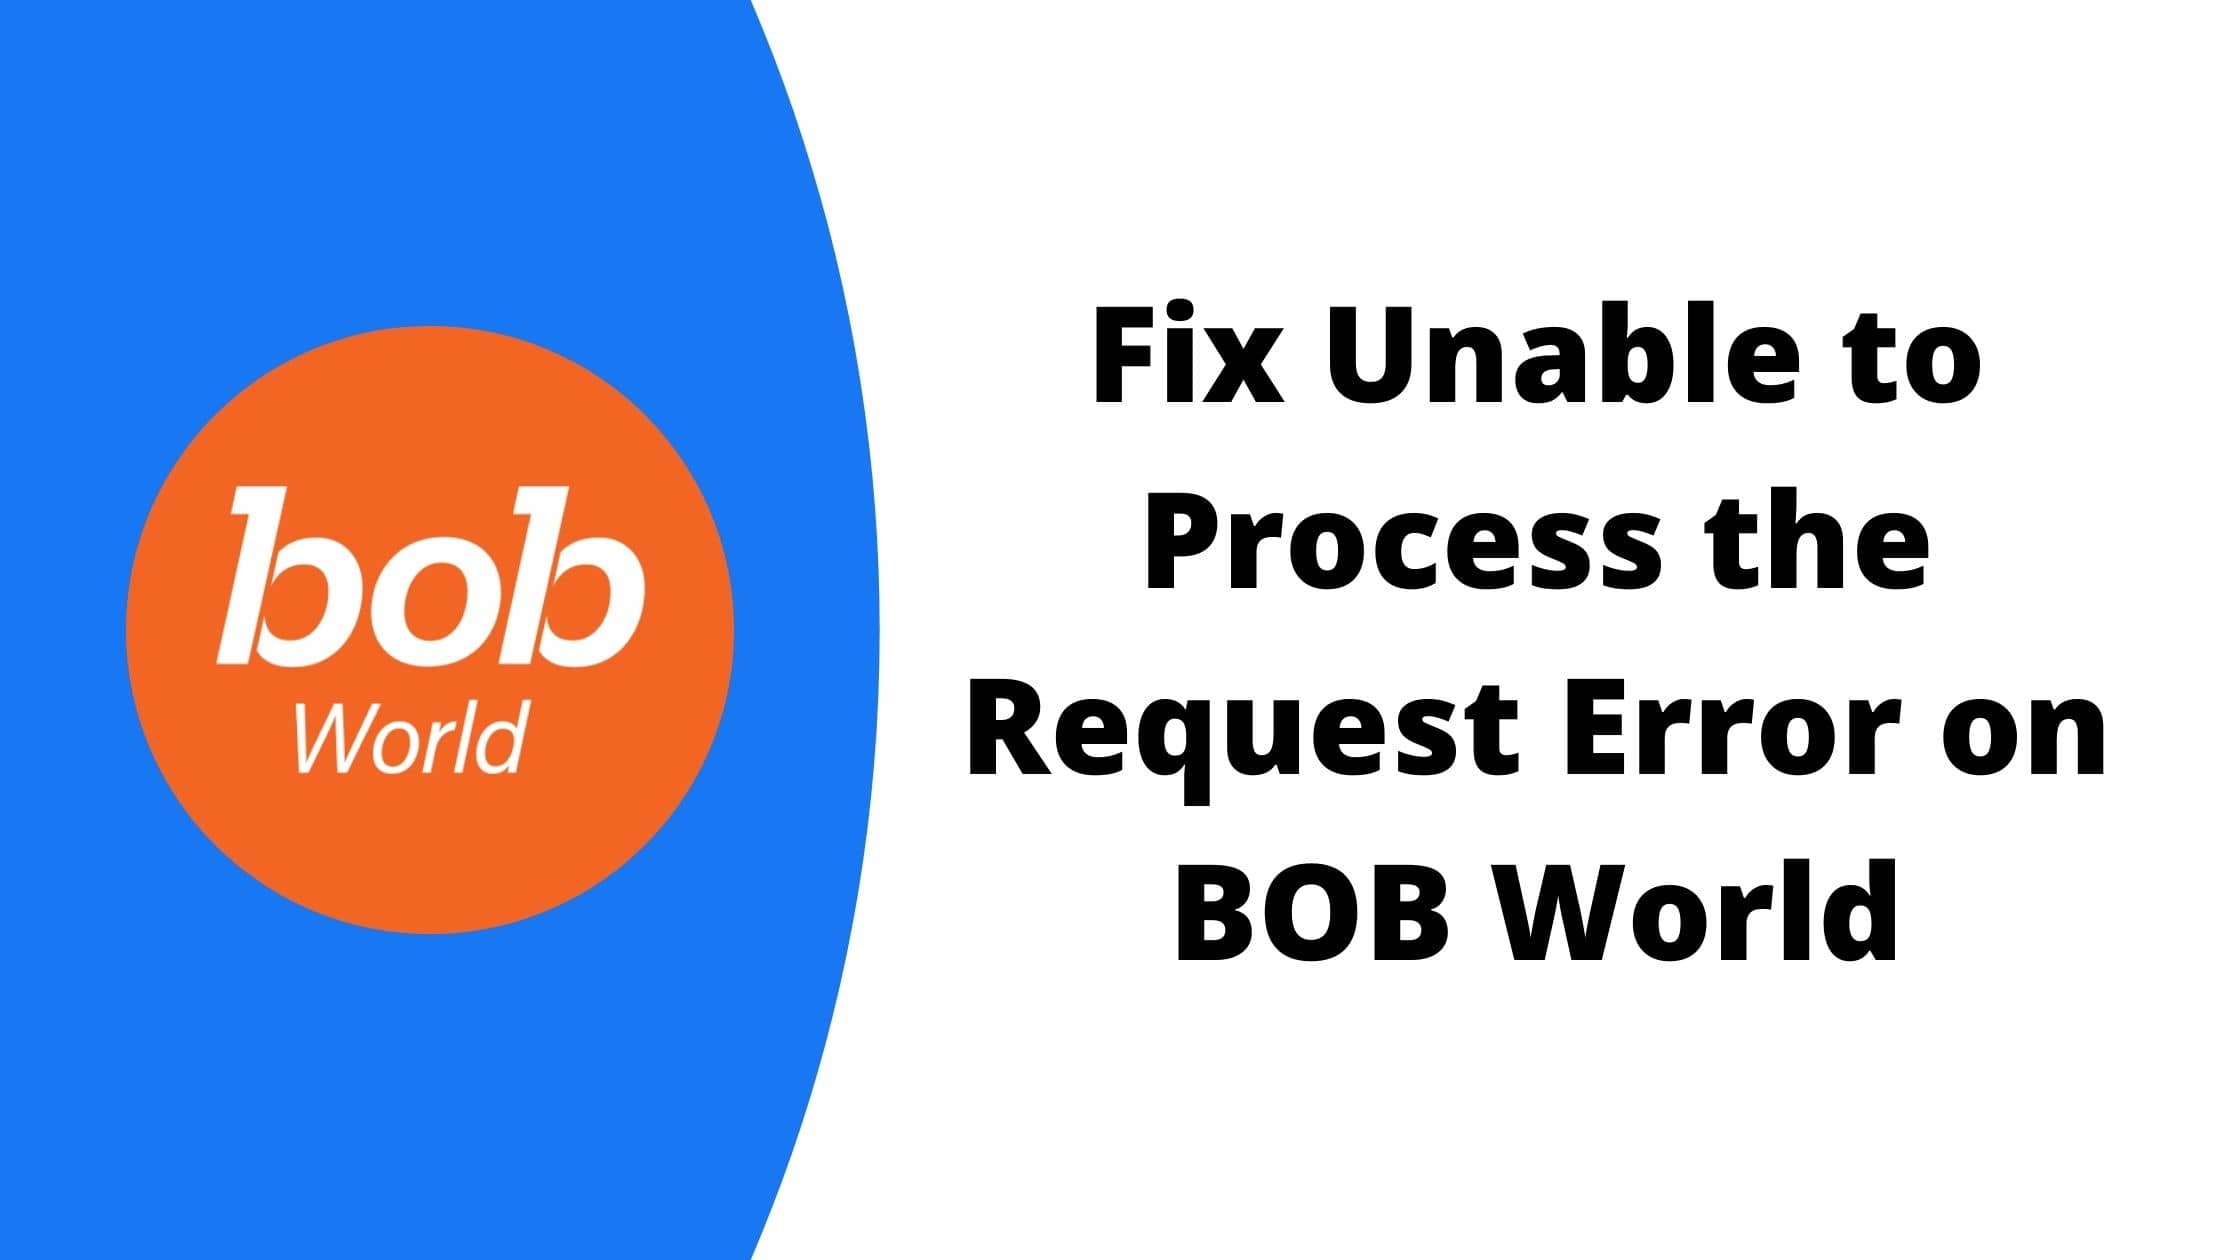 [Fixed] How to Fix Unable to Process the Request Error on BOB World